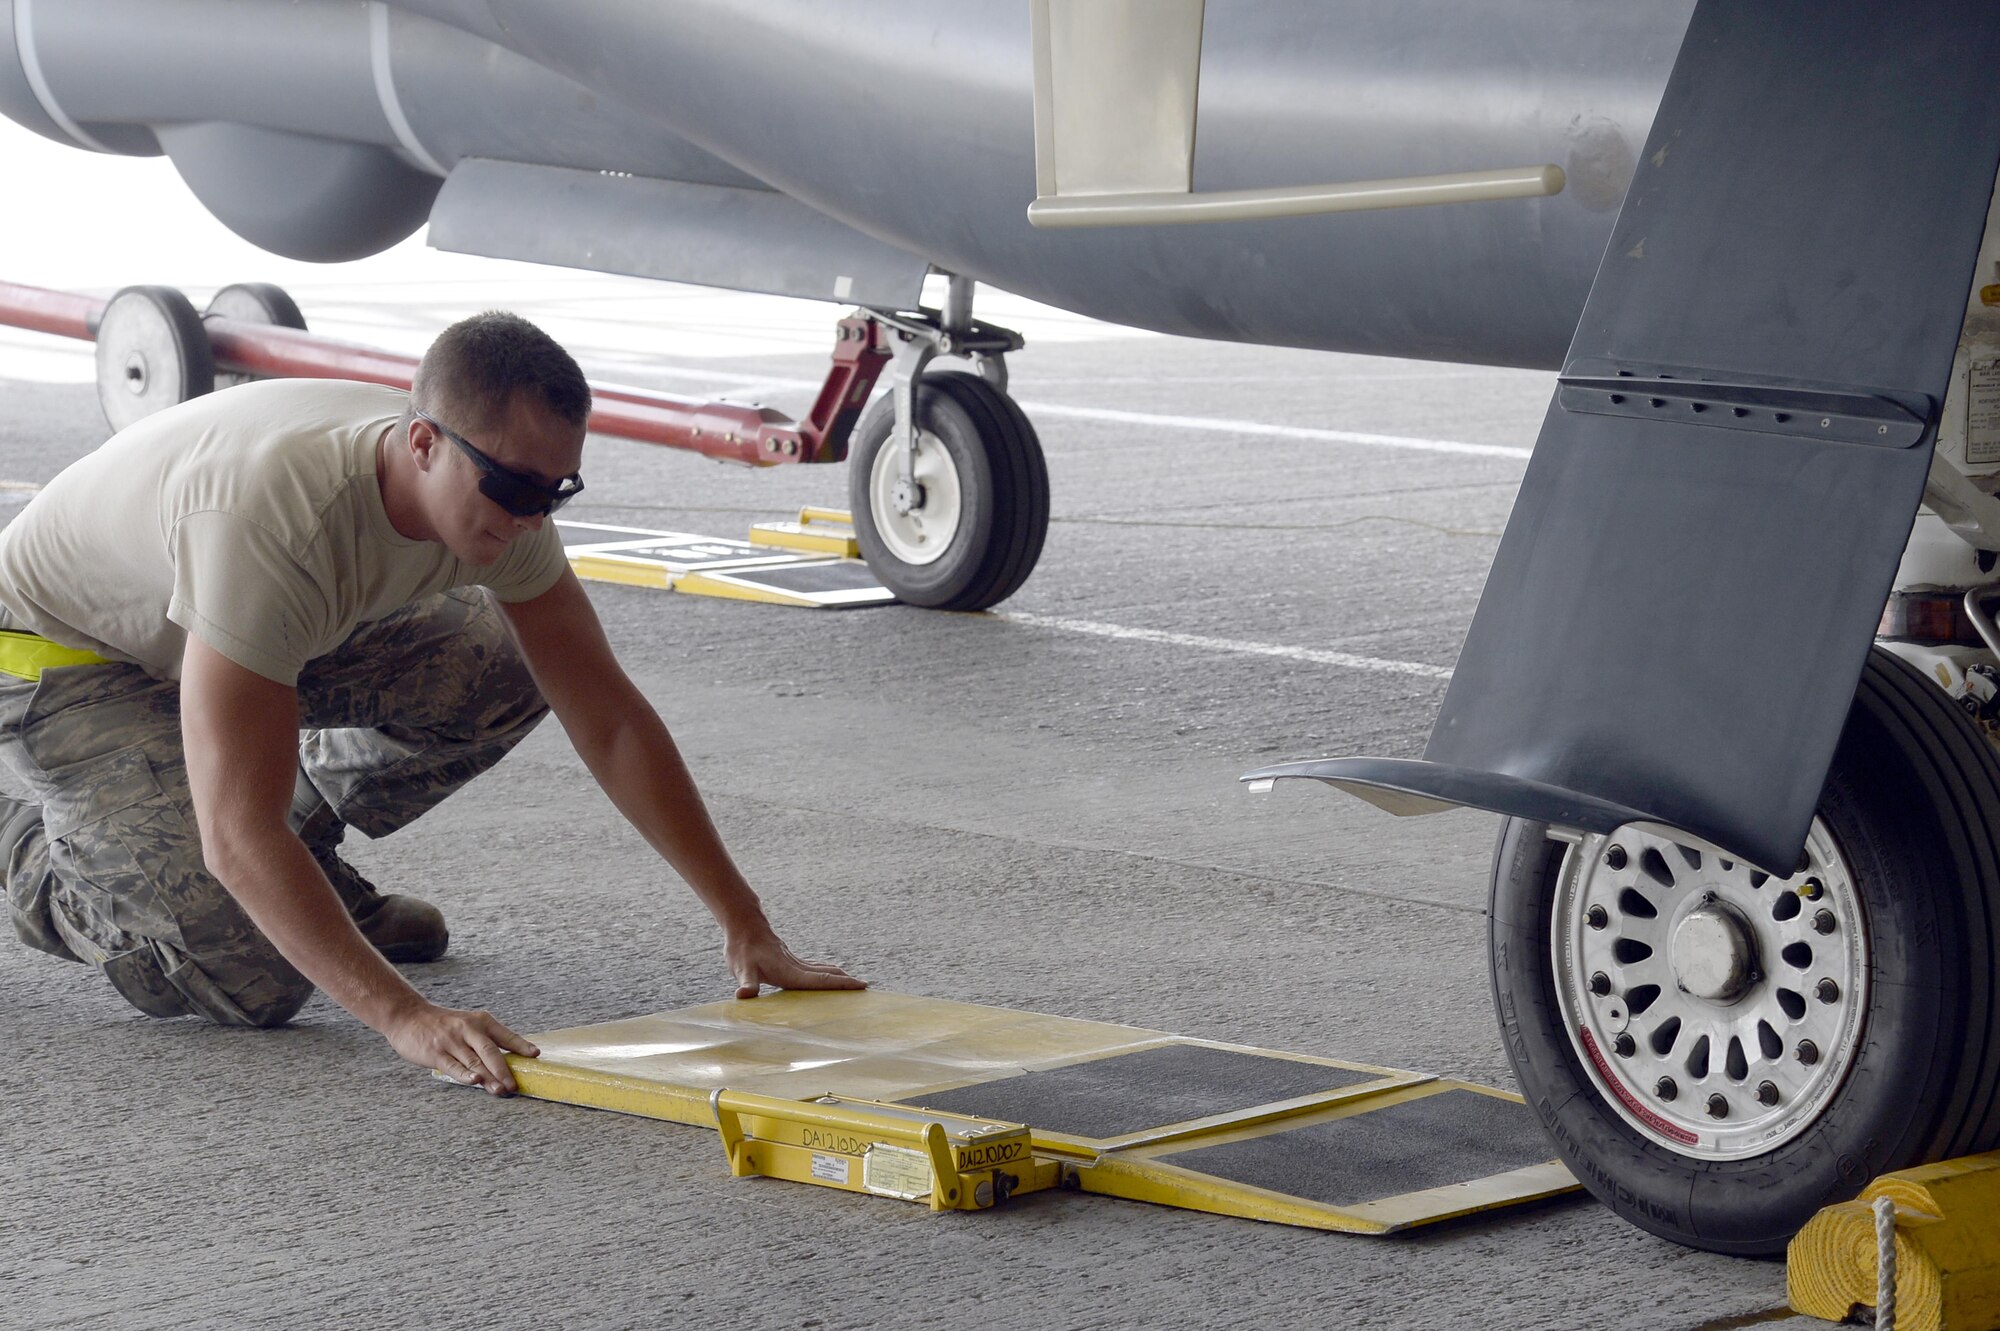 Airman 1st Class Dylan, avionics specialist, places a scale in front of a tire on a RQ-4 Global Hawk at an undisclosed location in Southwest Asia Mar. 8, 2015. The aircraft gets weighed to verify the fuel load and ensure the fuel is properly balanced throughout the aircraft. Dylan is currently deployed from Grand Forks Air Force Base, N.D. (U.S. Air Force photo/Tech. Sgt. Marie Brown)